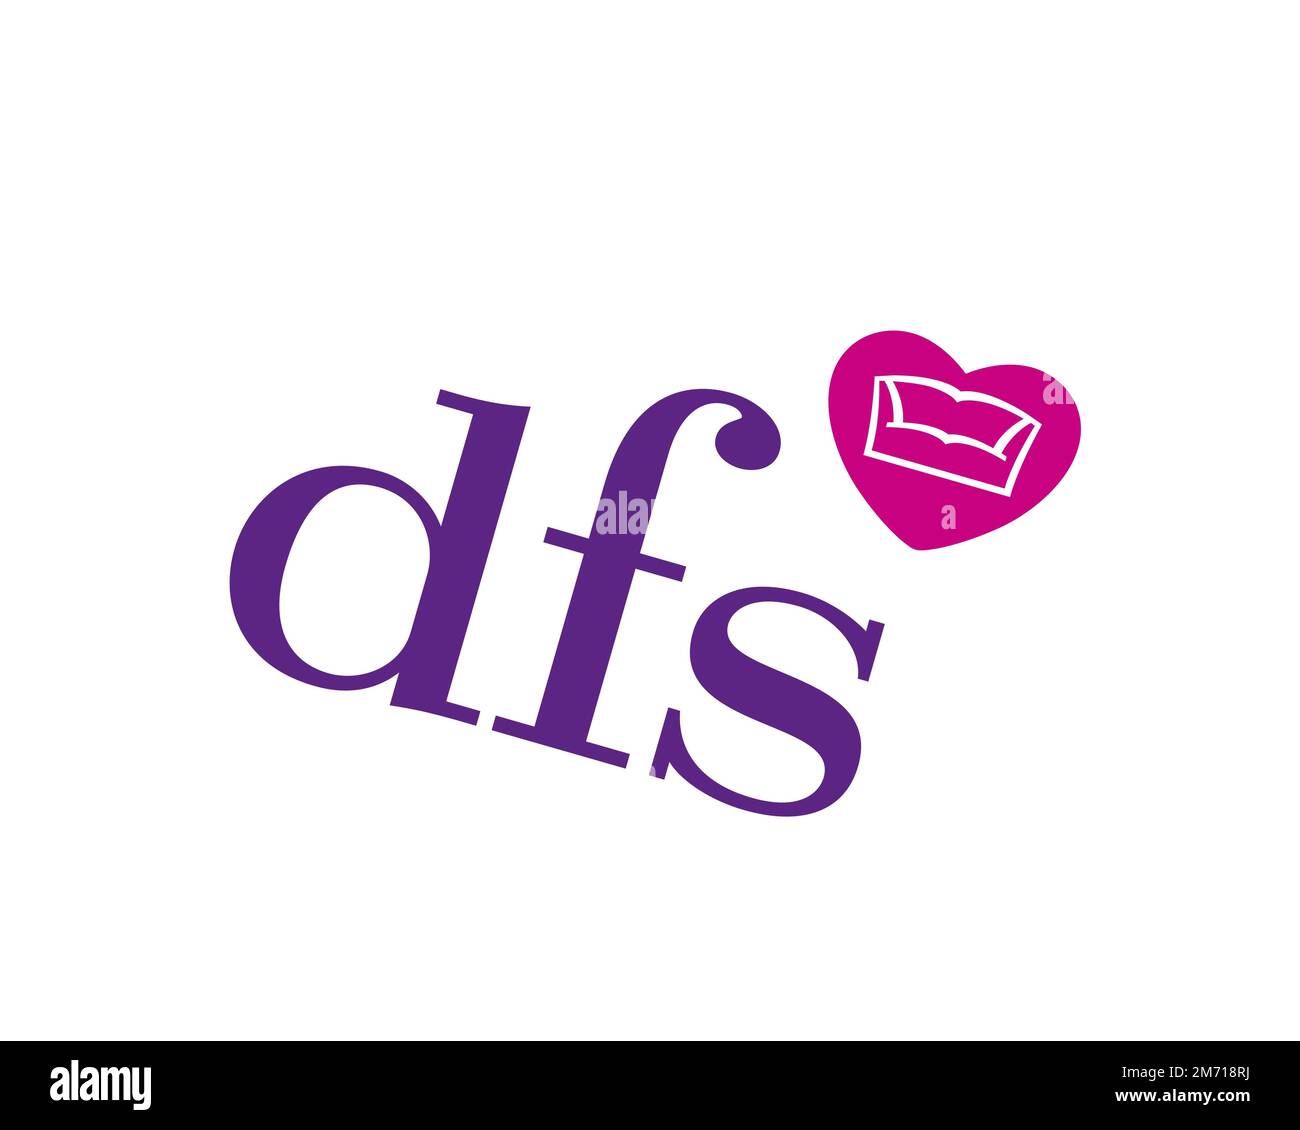 Dfs and furniture Cut Out Stock Images & Pictures - Alamy